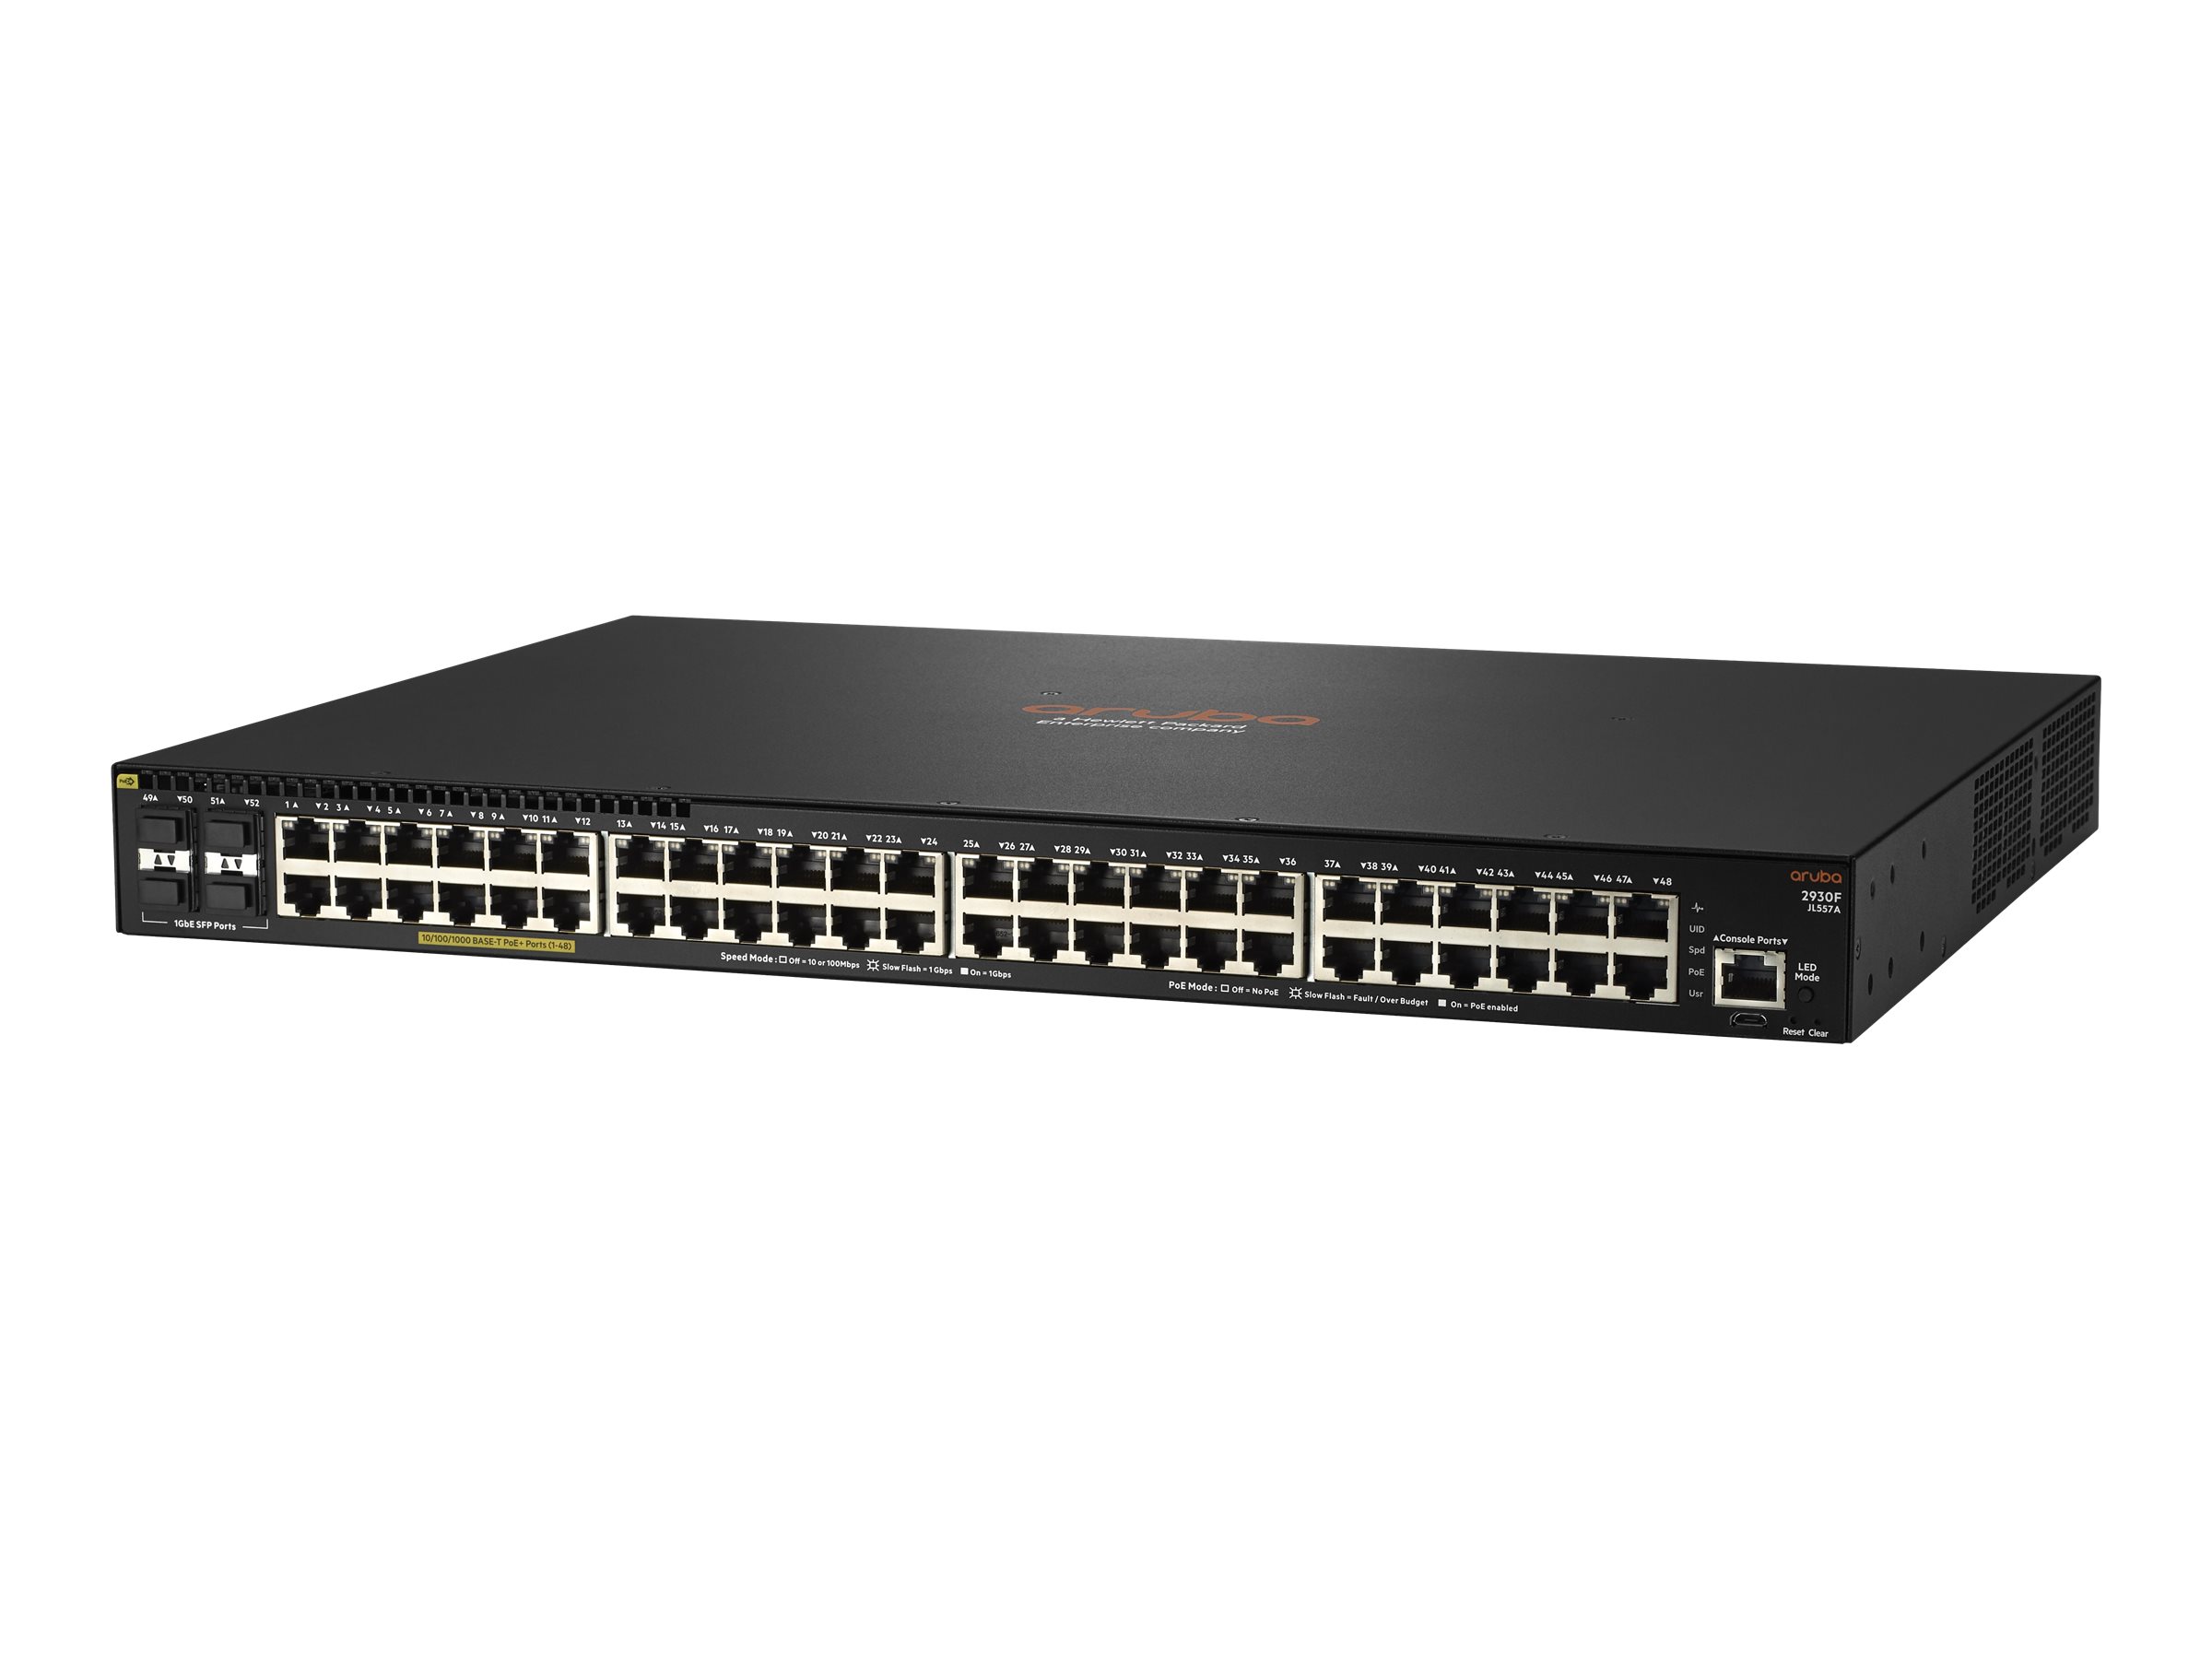 12-Port 100/1000/10G Base-T (RJ-45) Stackable Switch with 4 SFP/SFP+Slot 